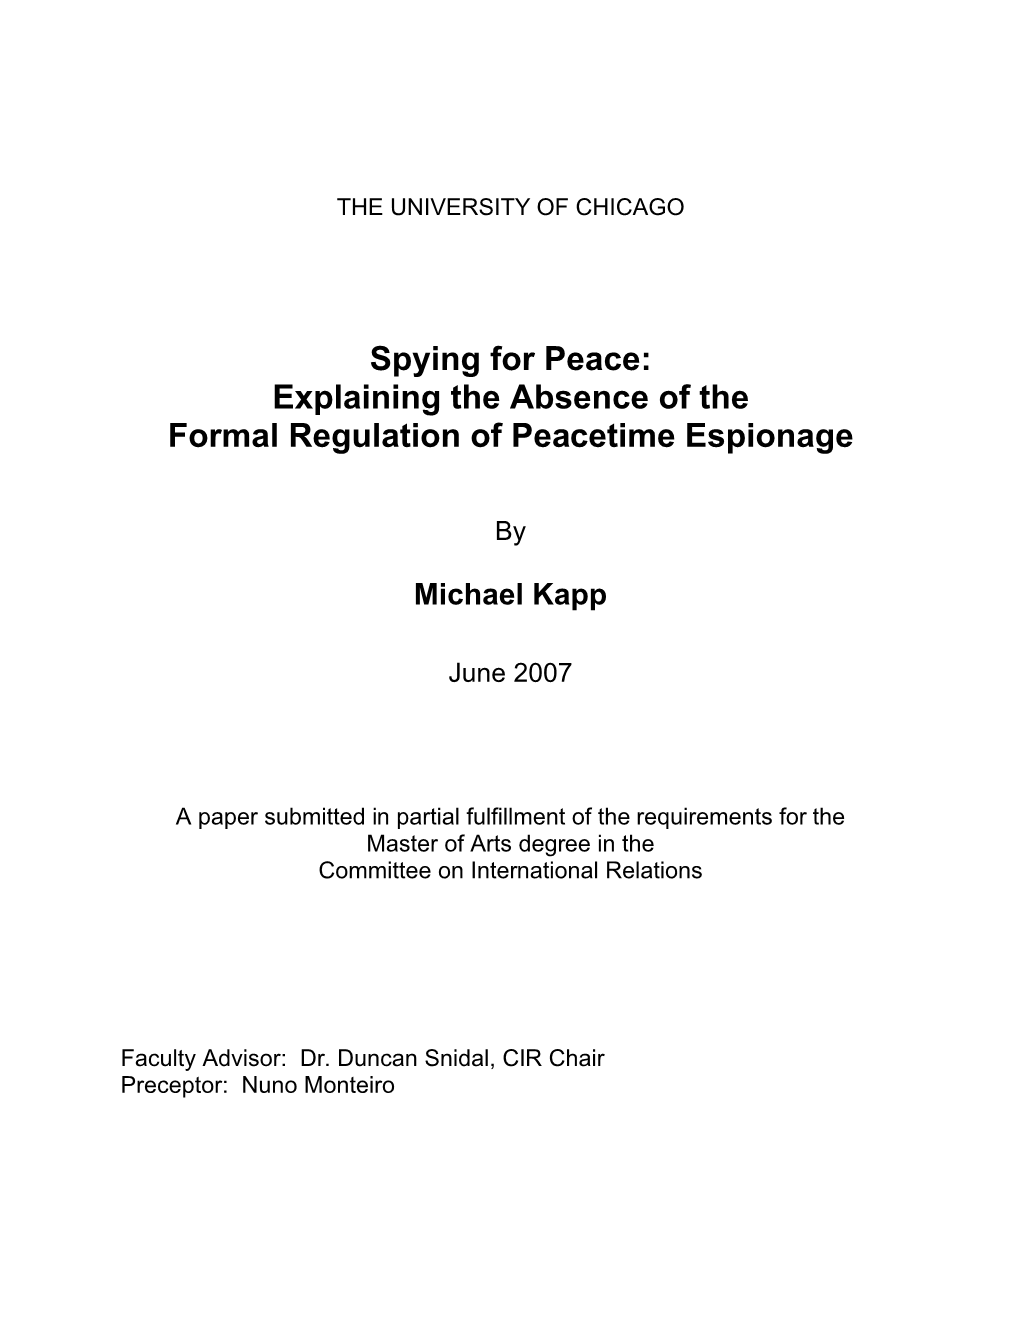 Spying for Peace: Explaining the Absence of the Formal Regulation of Peacetime Espionage